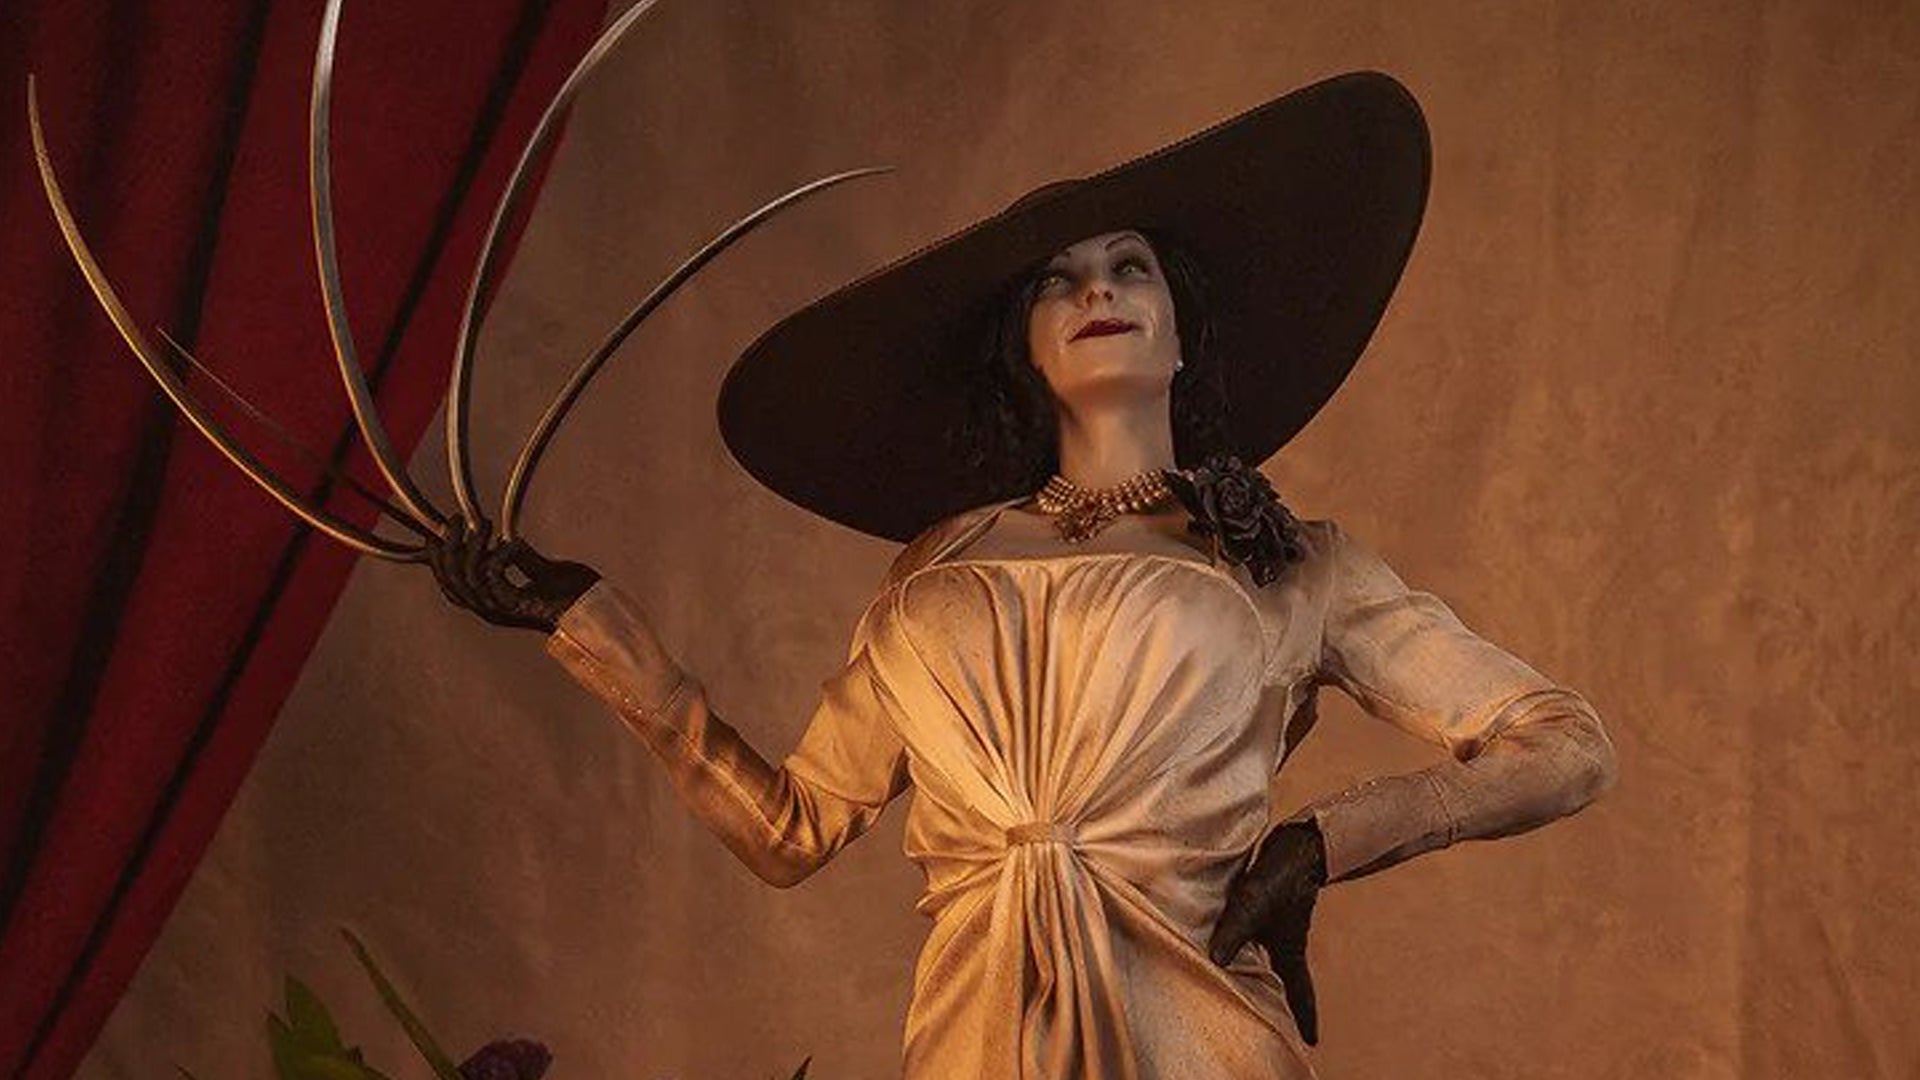 Image for Everyone needs to be normal about this three-foot tall Lady Dimitrescu statue